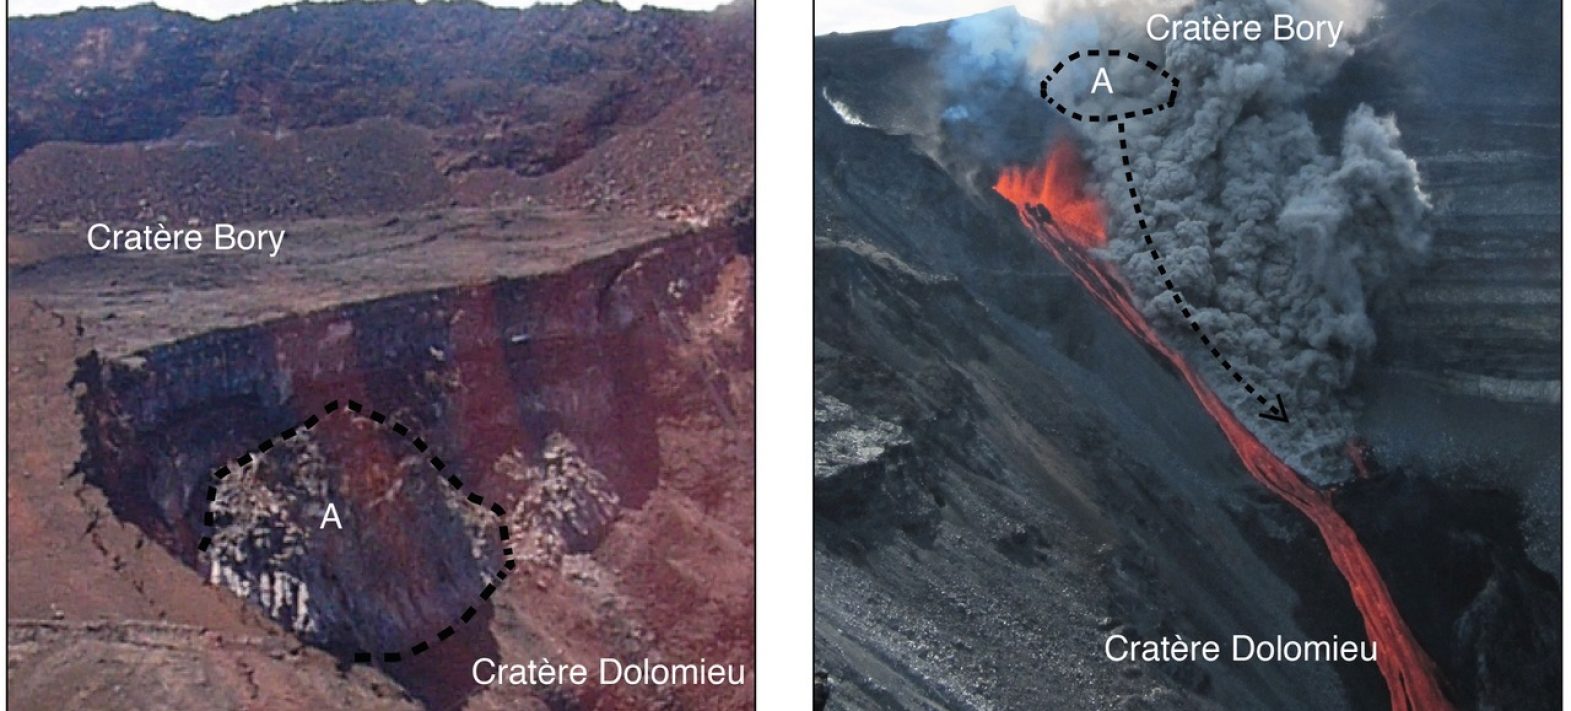 Study of the unstable zones around the Dolomieu crater and assessment of the risks for visitors